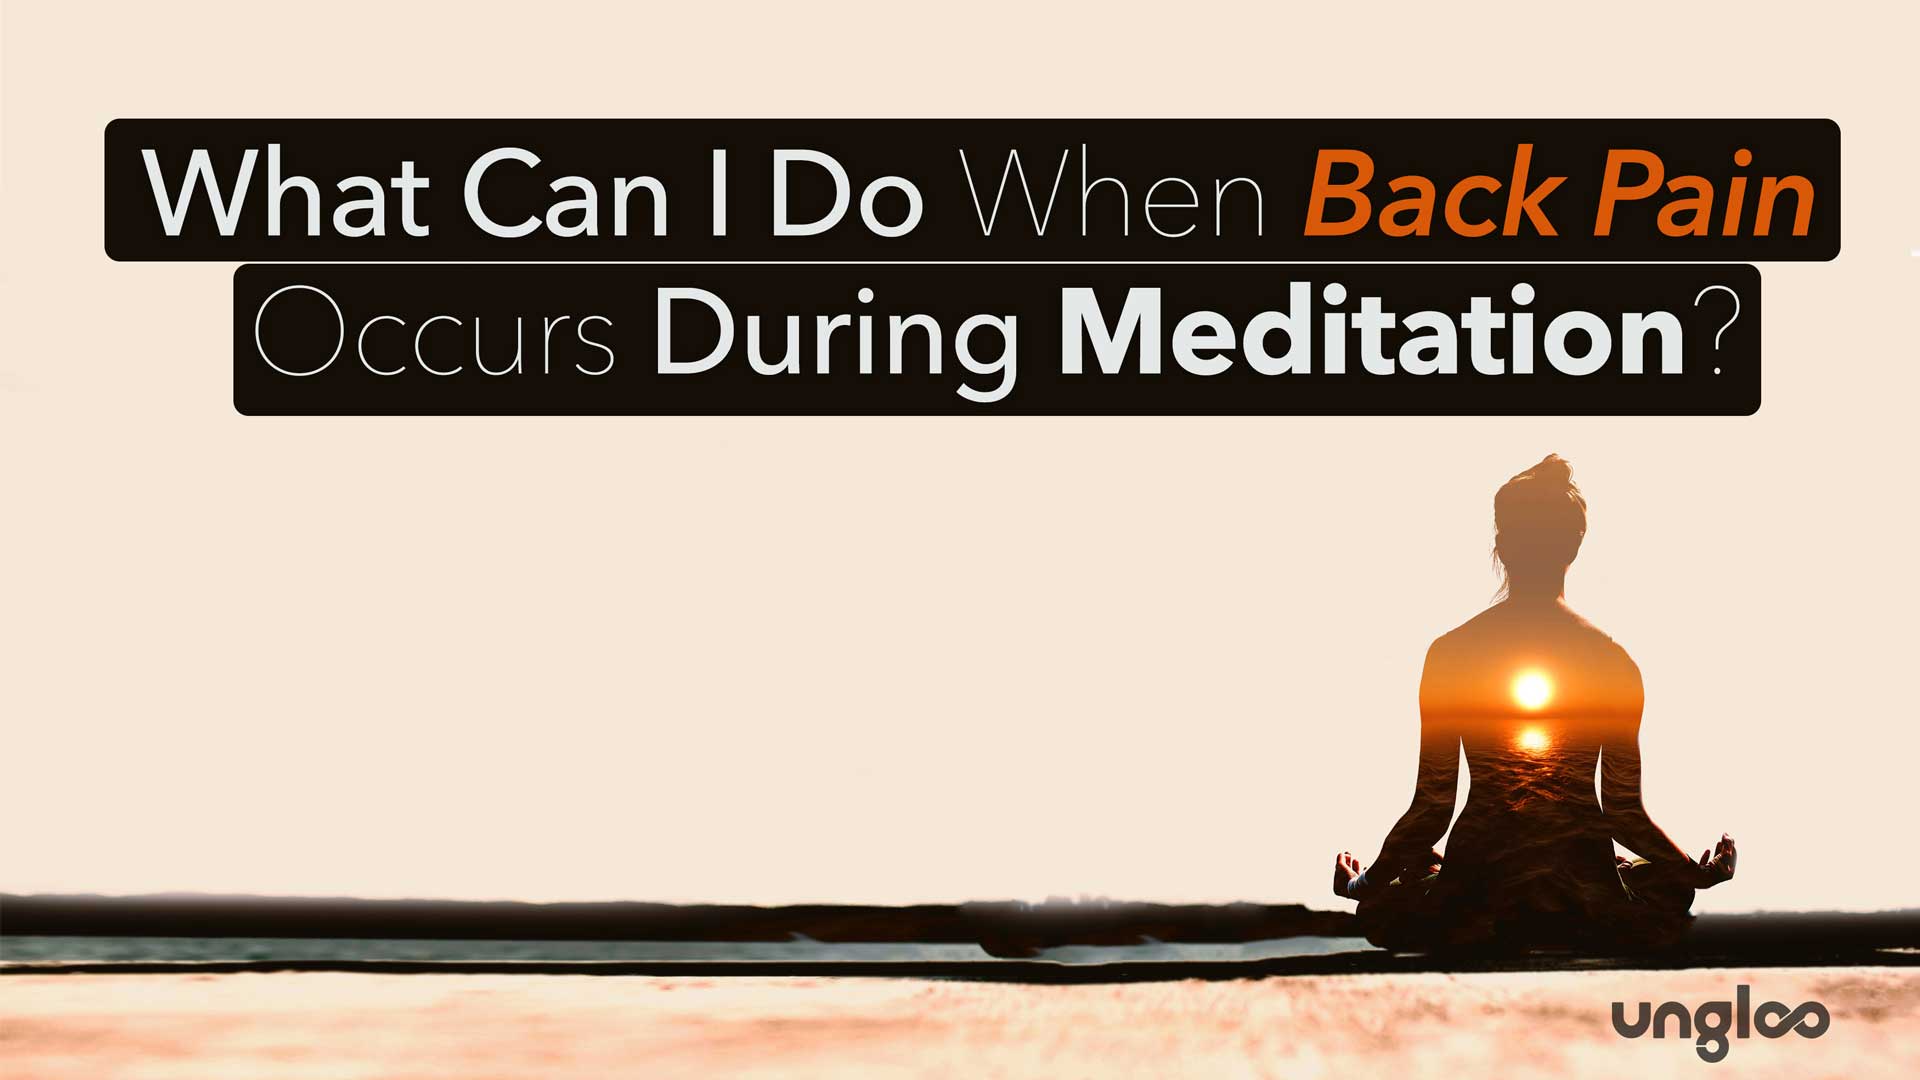 What Can I Do When Back Pain Occurs During Meditation?